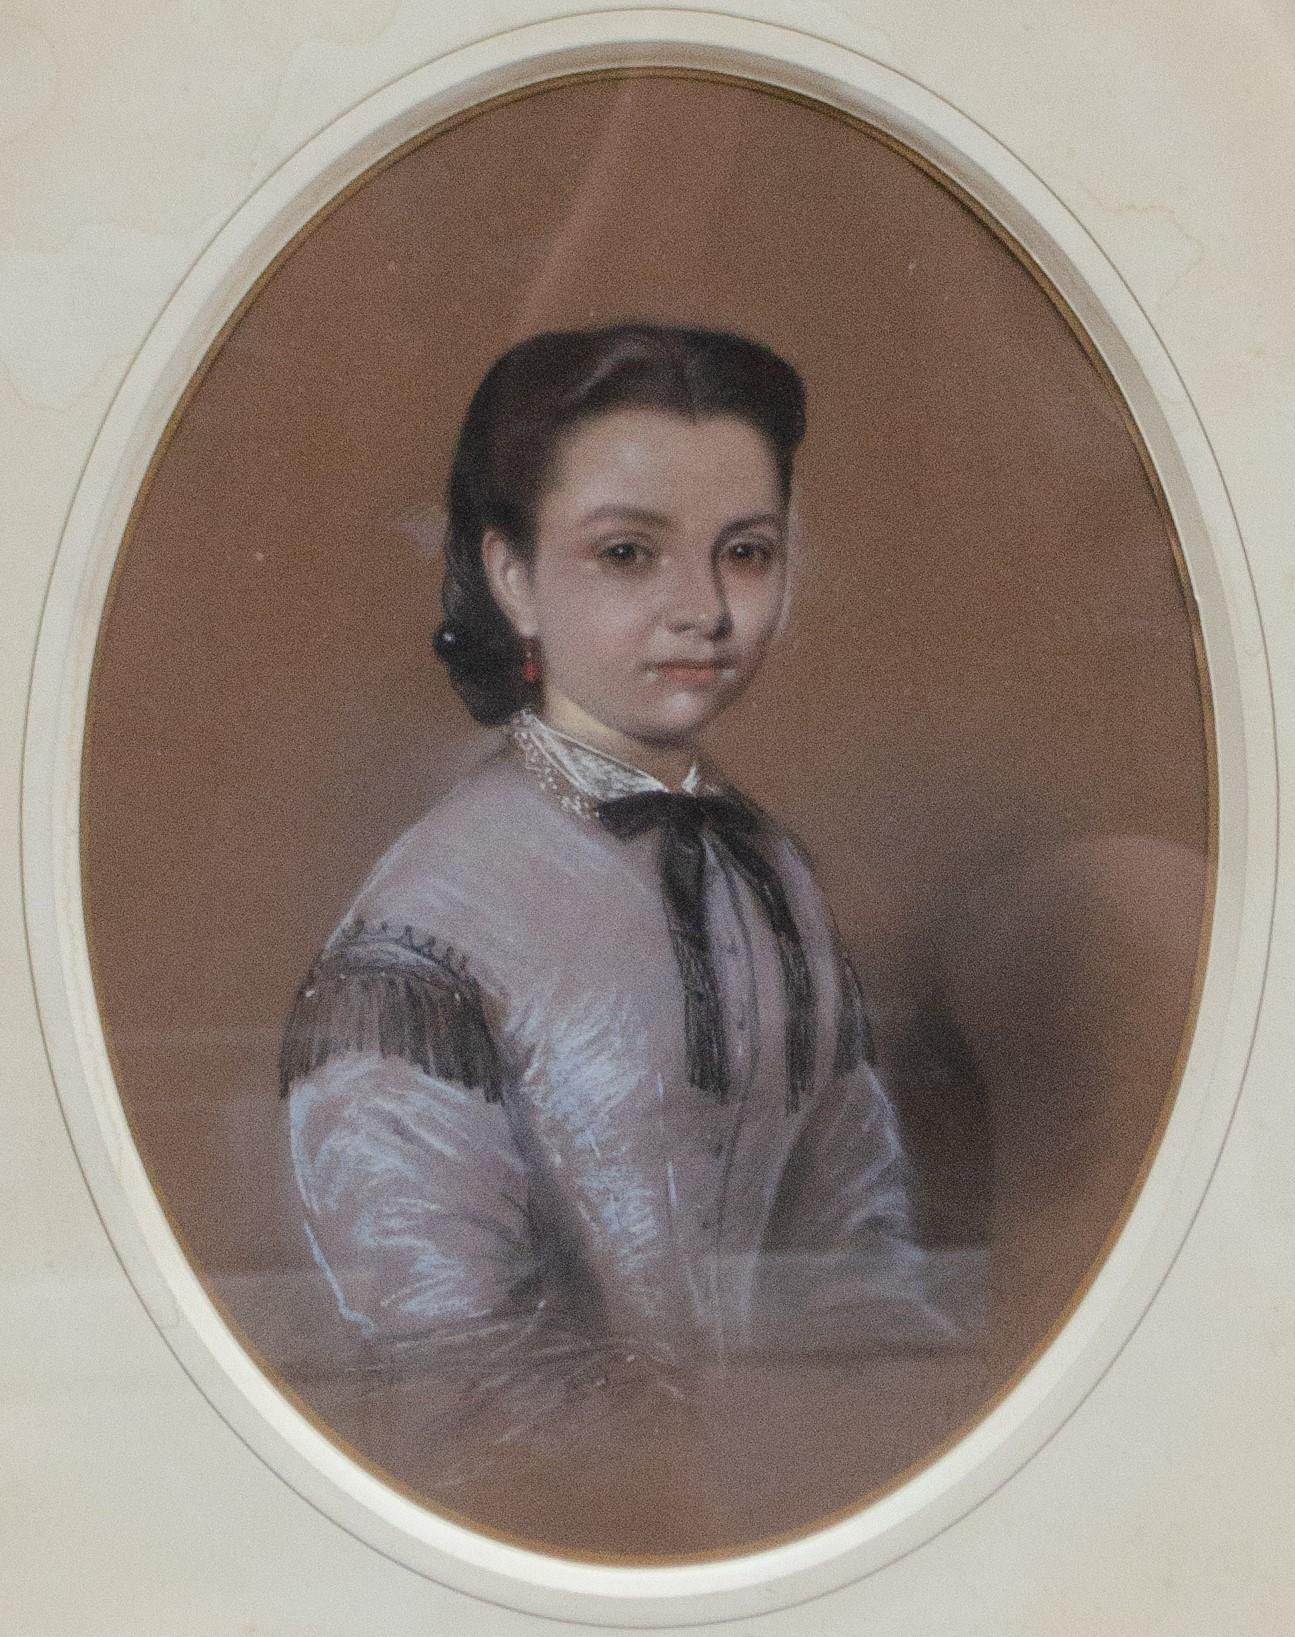 Portrait Of A Young Girl  In A Lilac Dress With A Black Bow. Circa 1860. SIgned.